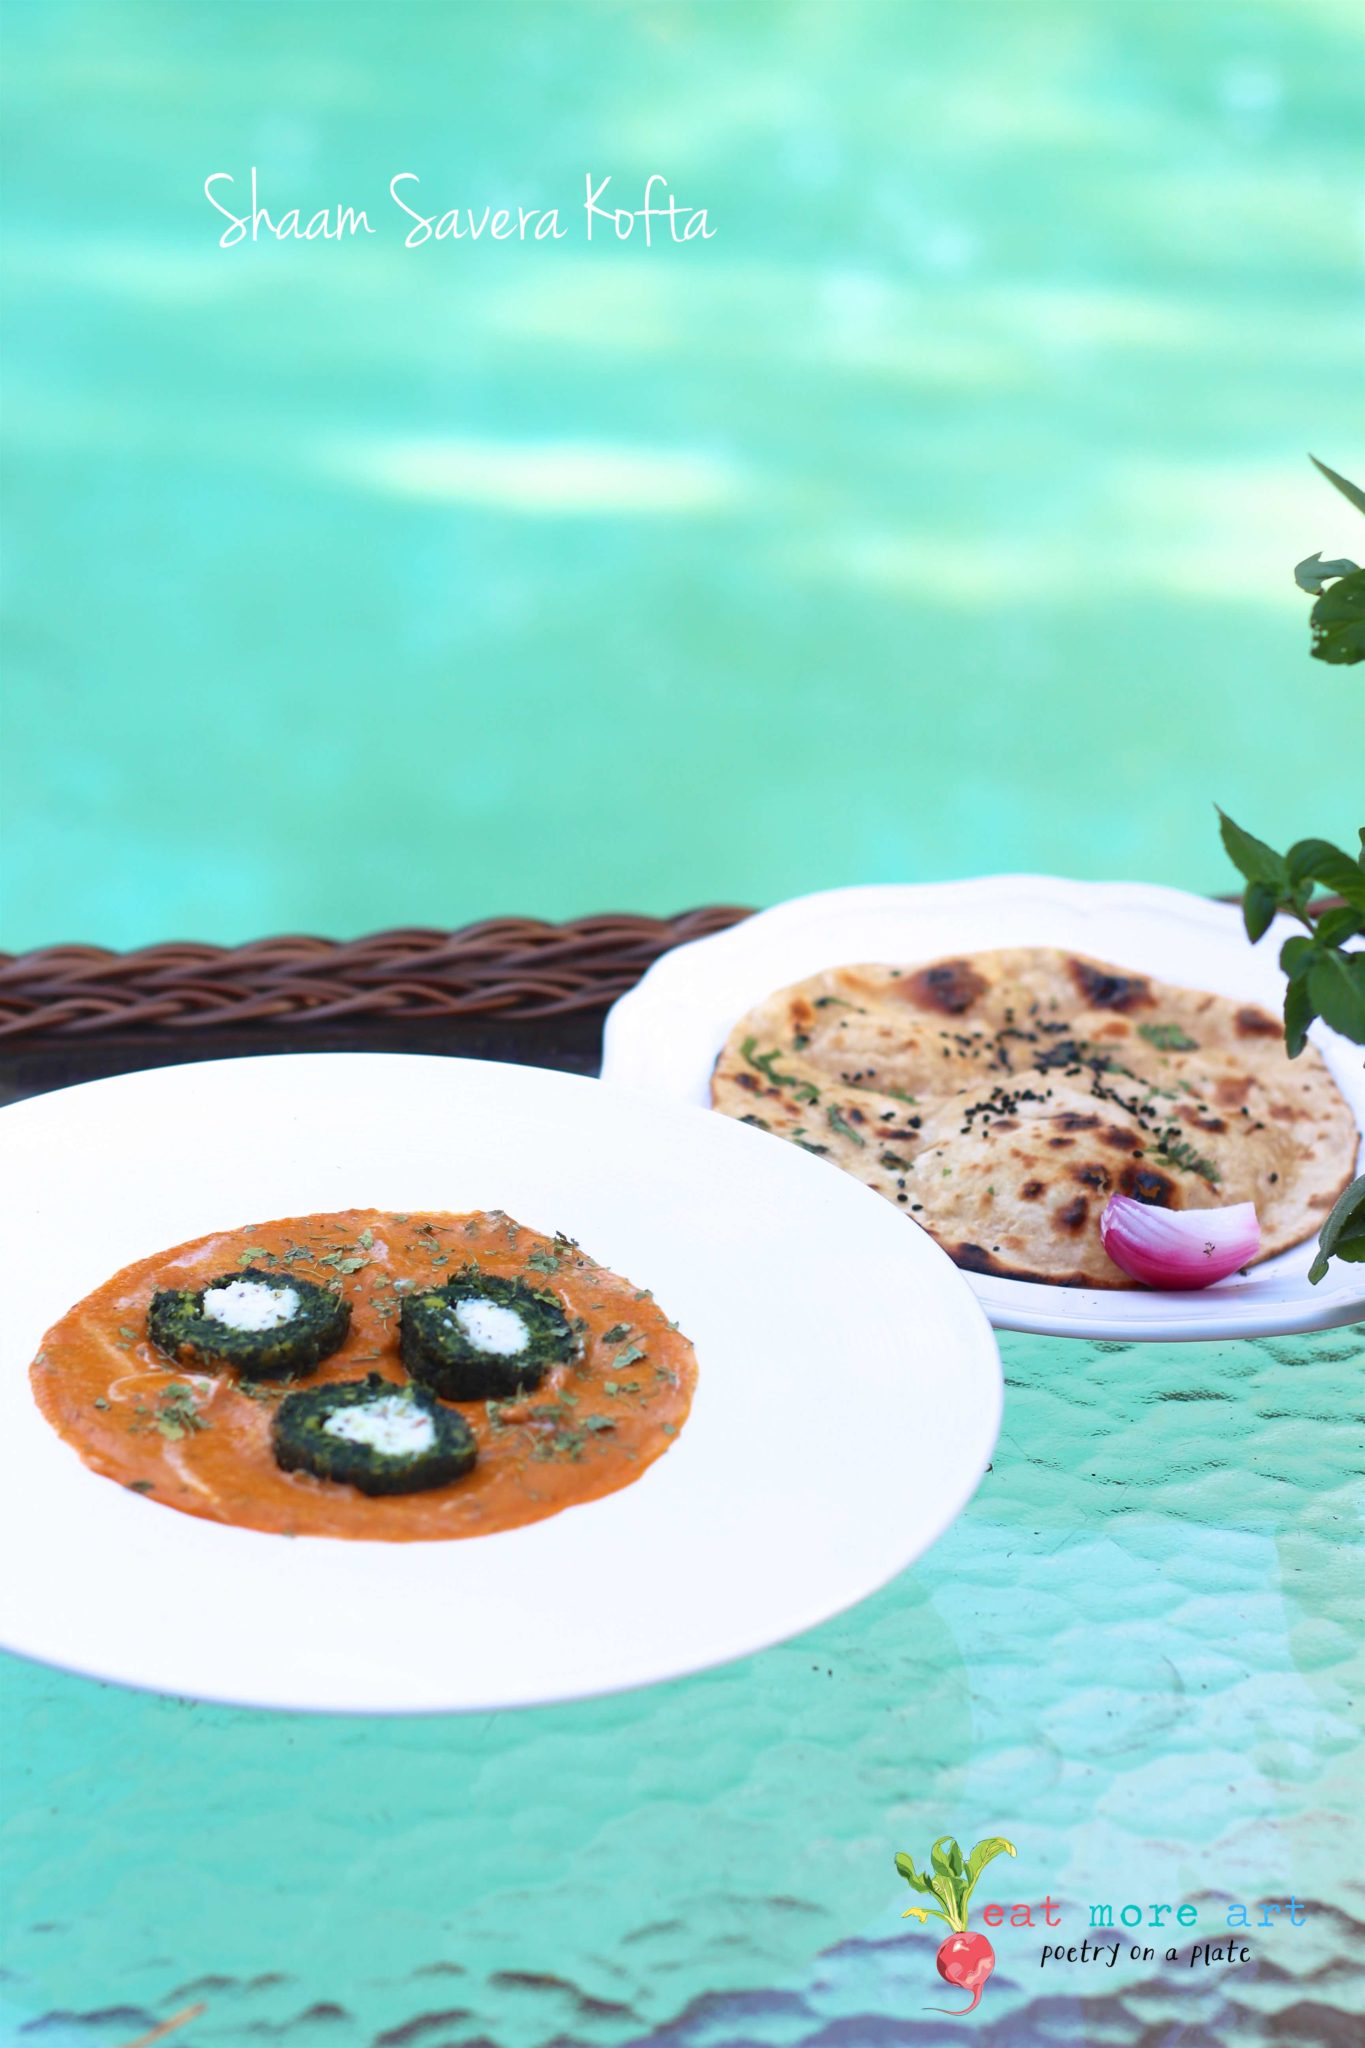 A plate of green spinach kofta with cut in half with white panner in center served with a side of roti with teal color pool background